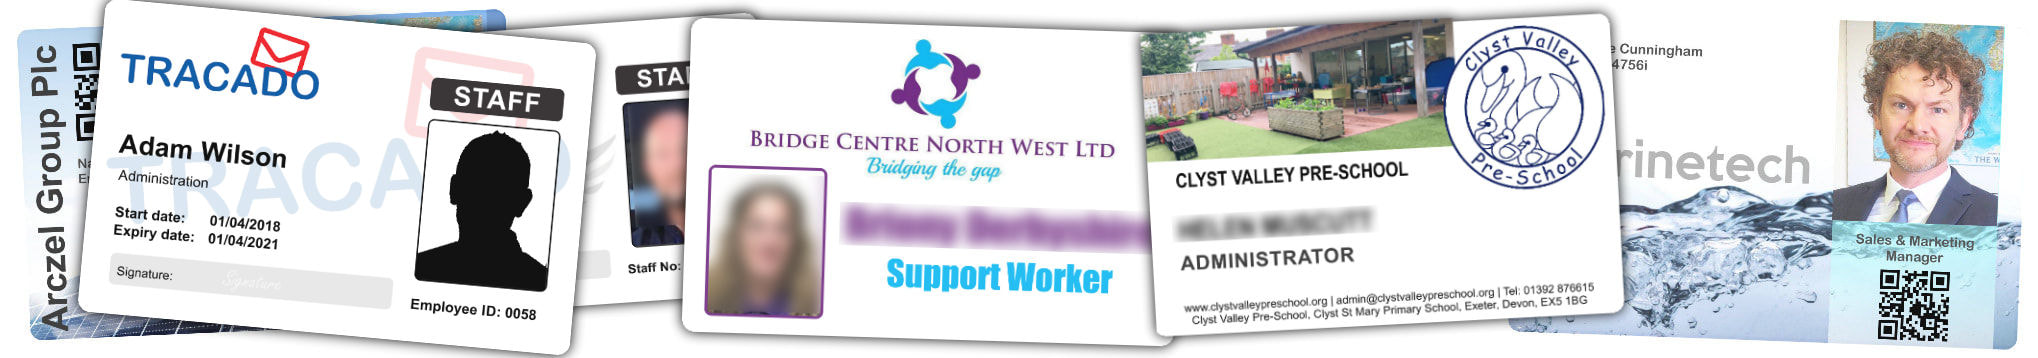 Chelmsford examples of staff photo ID cards | samples of employee Identity card printing | Workers ID cards printed in 